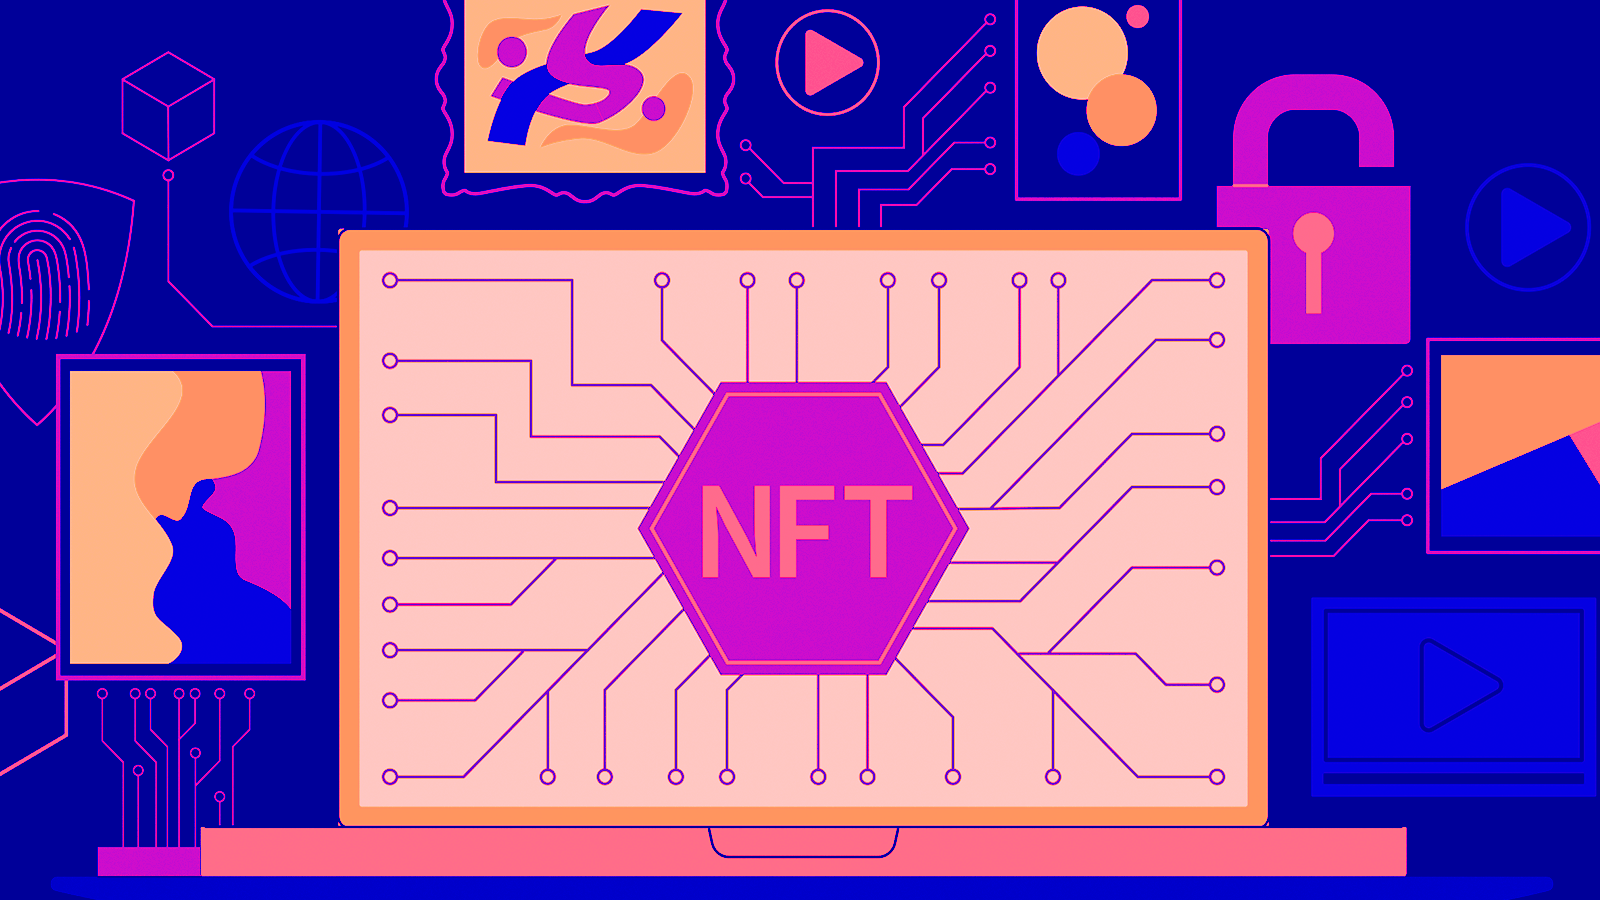 What Are Utility NFTs?